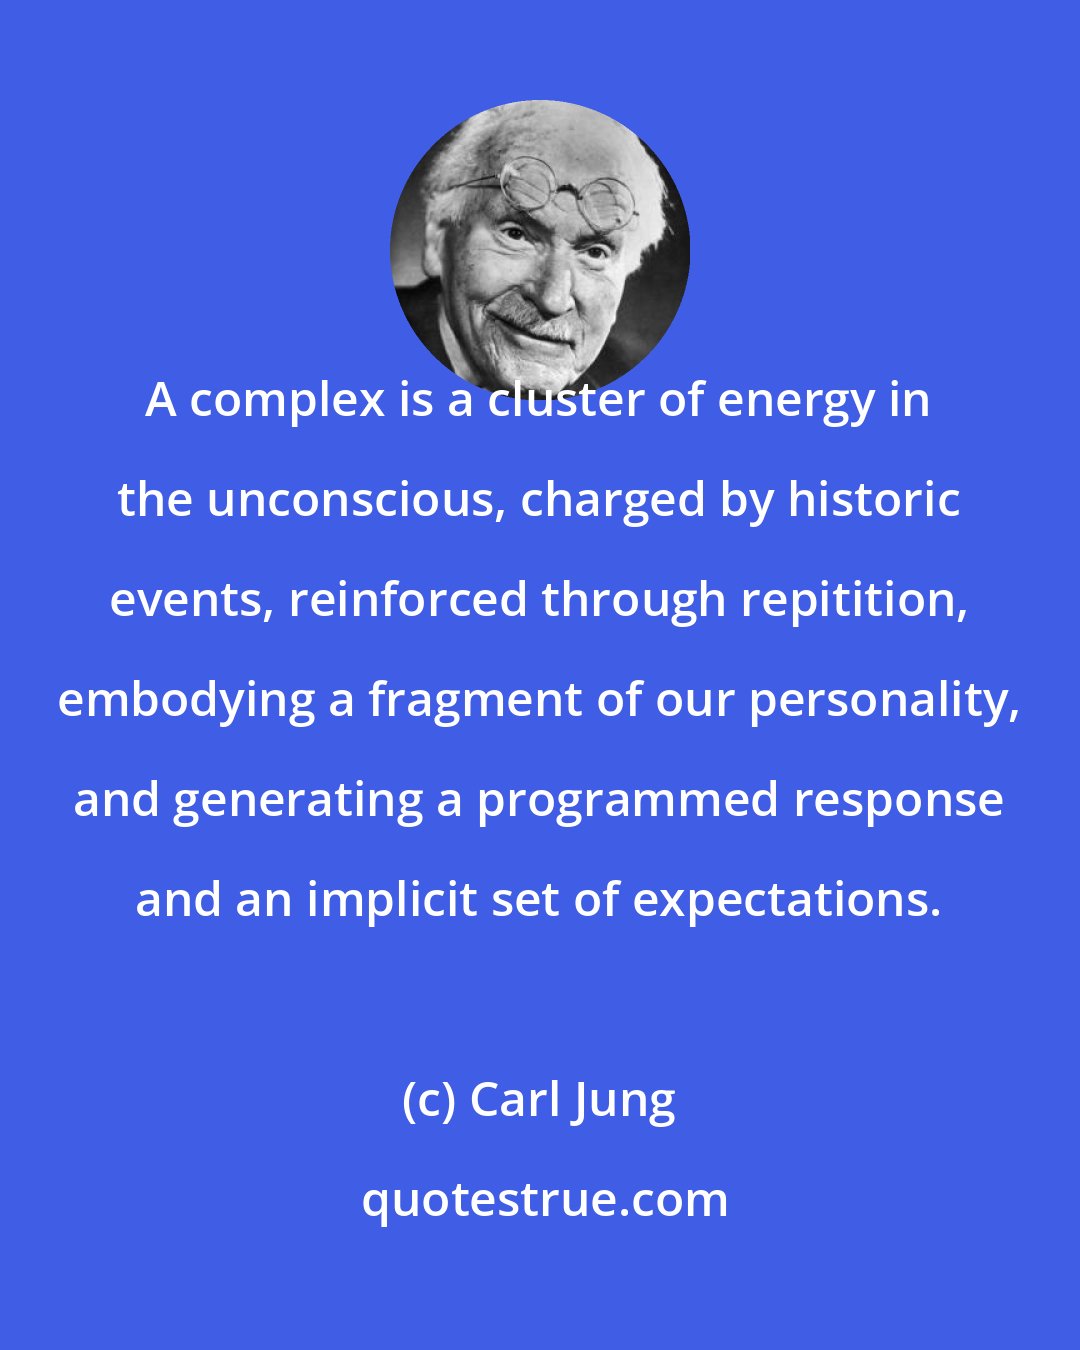 Carl Jung: A complex is a cluster of energy in the unconscious, charged by historic events, reinforced through repitition, embodying a fragment of our personality, and generating a programmed response and an implicit set of expectations.